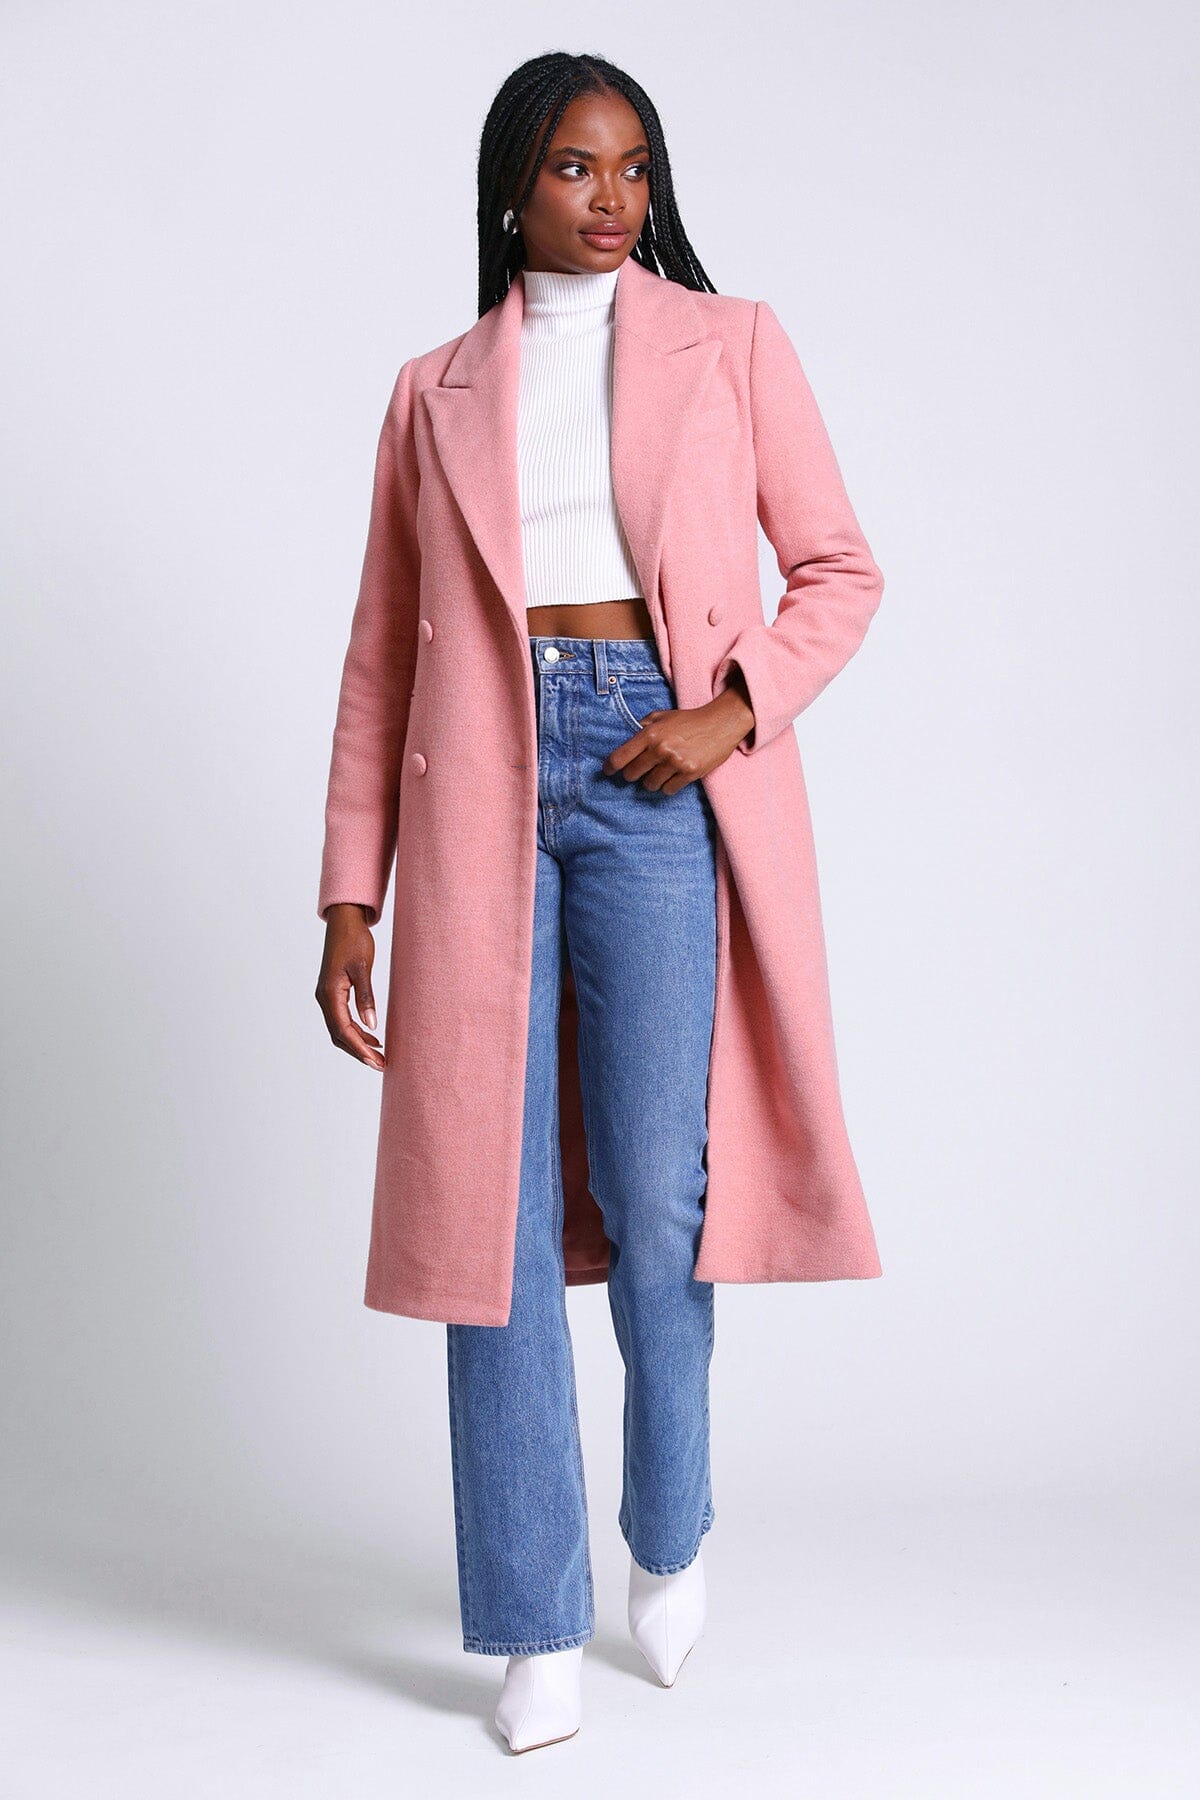 Rose pink tailored double breasted long coat jacket - figure flattering day to night coats outerwear for women